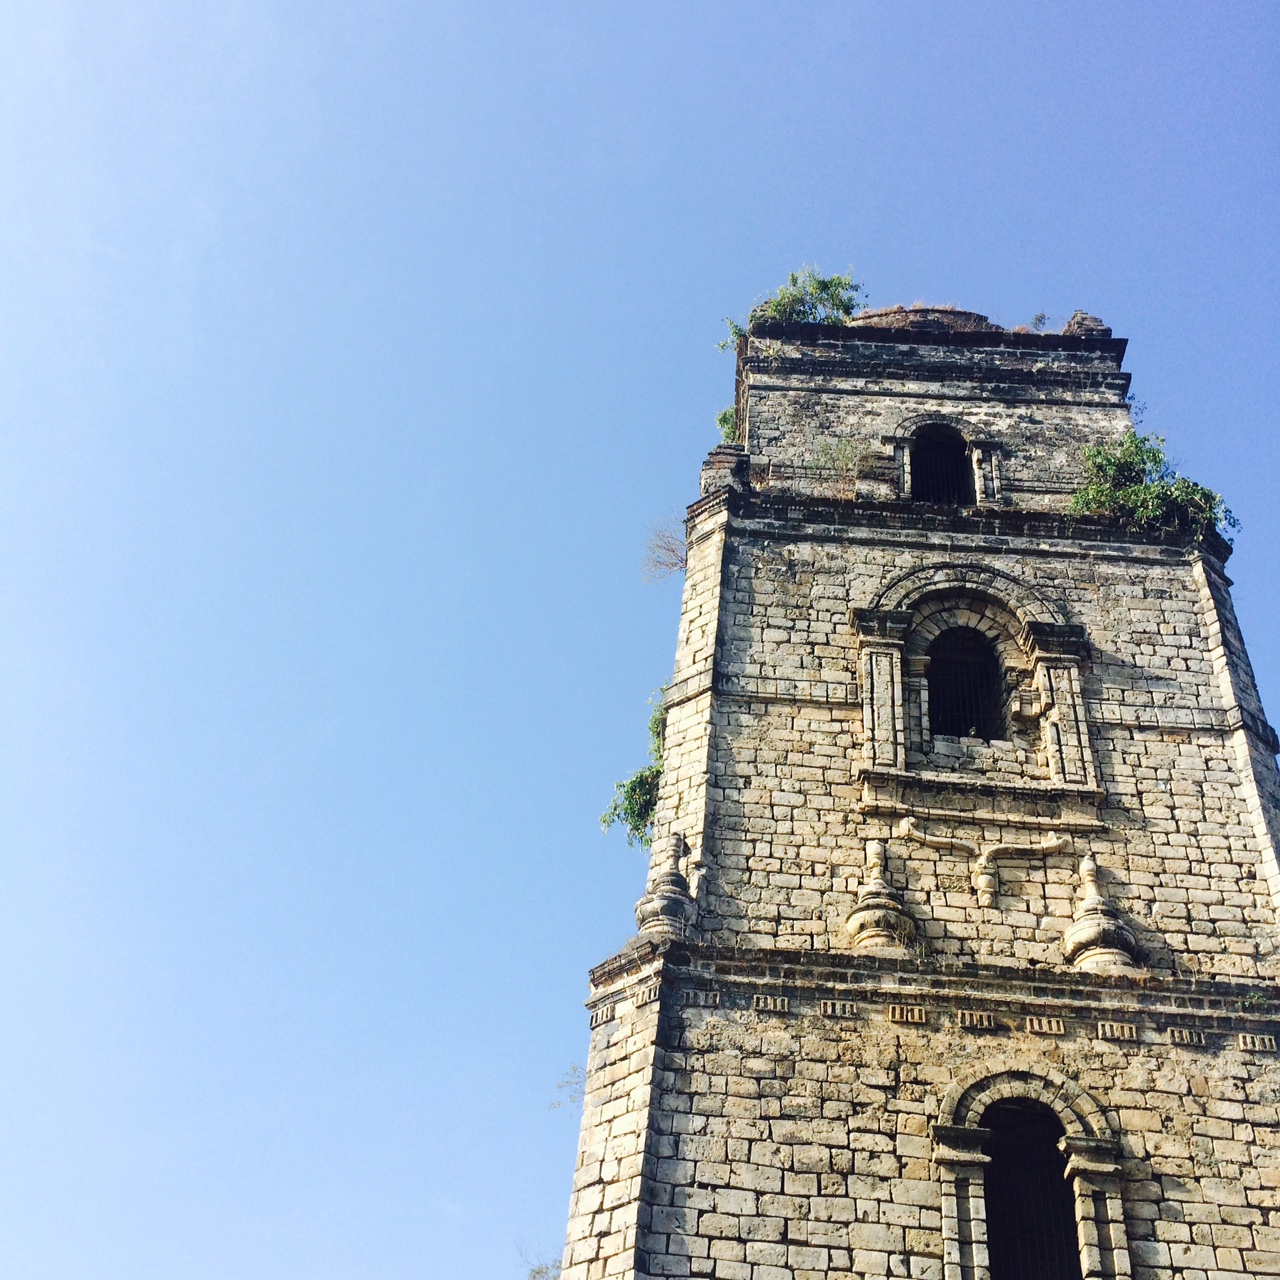 I received a very powerful insight during a very early coaching session (6 in the morning!):  God trusts you.  This message really resonated with me and will stay with me as I go through this life coaching journey. (Photo is of the Paoay church bell tower during my mini vacay to Ilocos during Holy Week.)